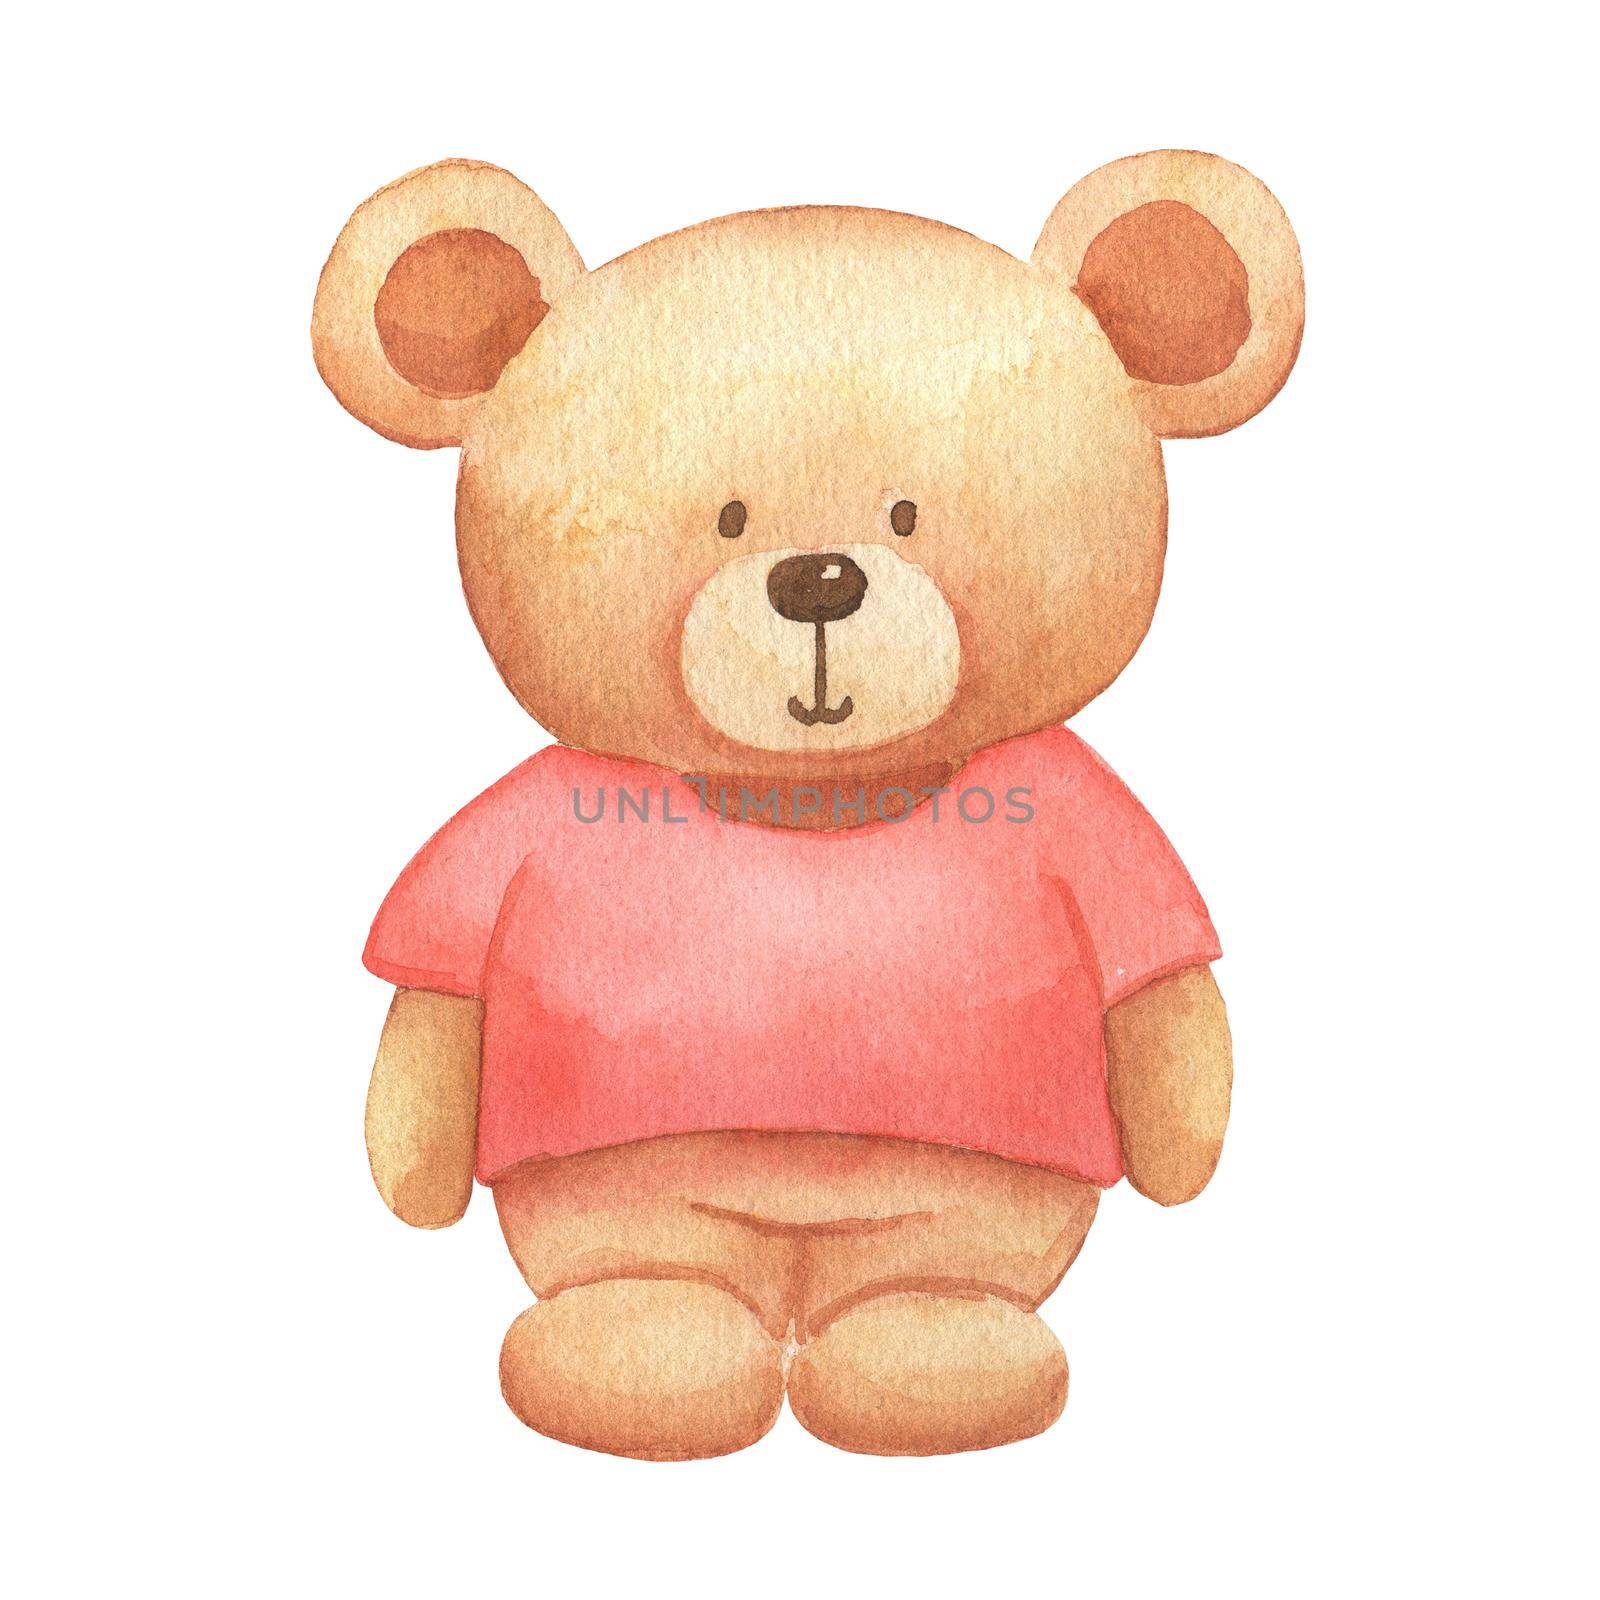 Watercolor cute bear toy in pink T-shirt. Hand drawn illustration isolated on white